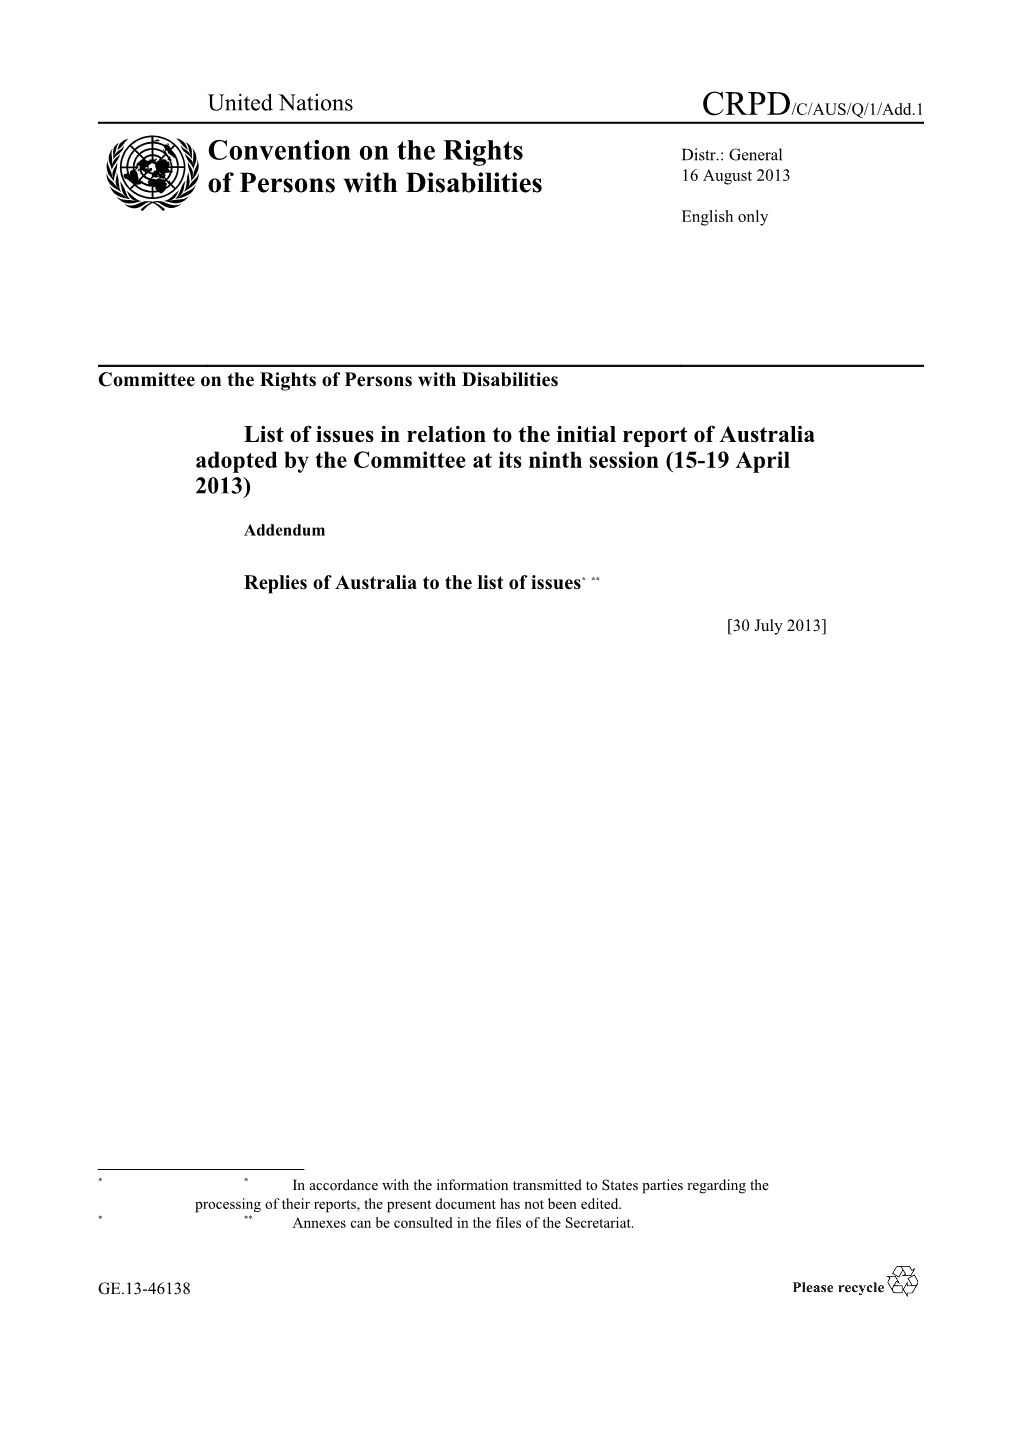 Committee on the Rights of Persons with Disabilities s6